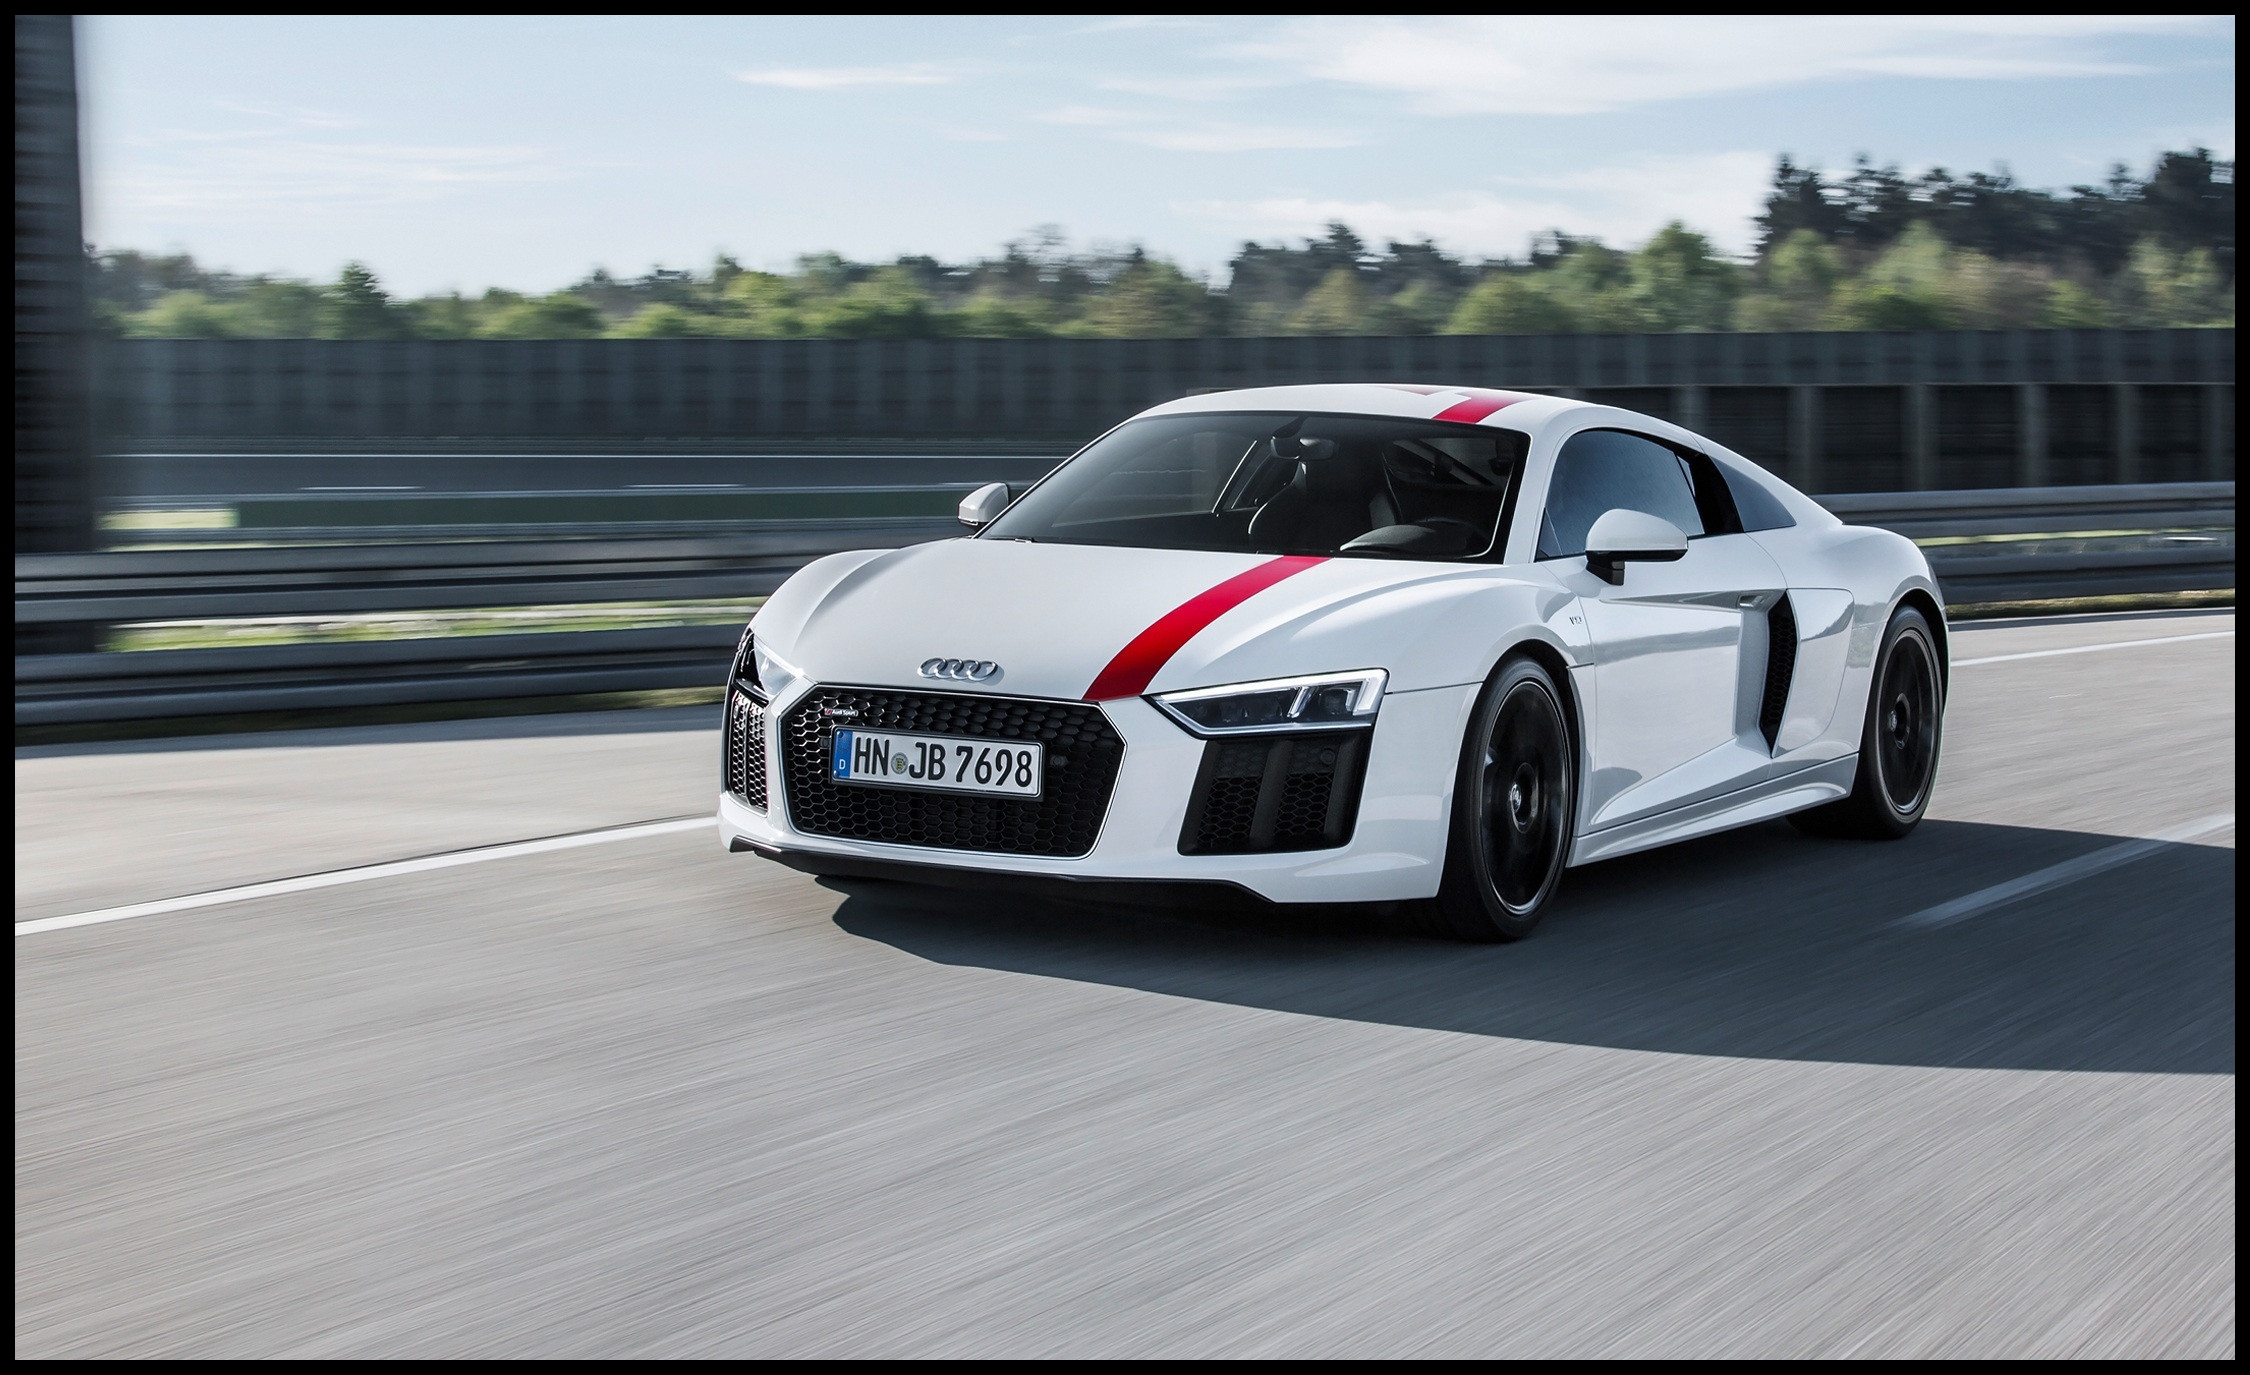 2019 Audi R8 Coupe 2019 Audi R8 New 2018 Audi R8 Coupe Review the Best Car